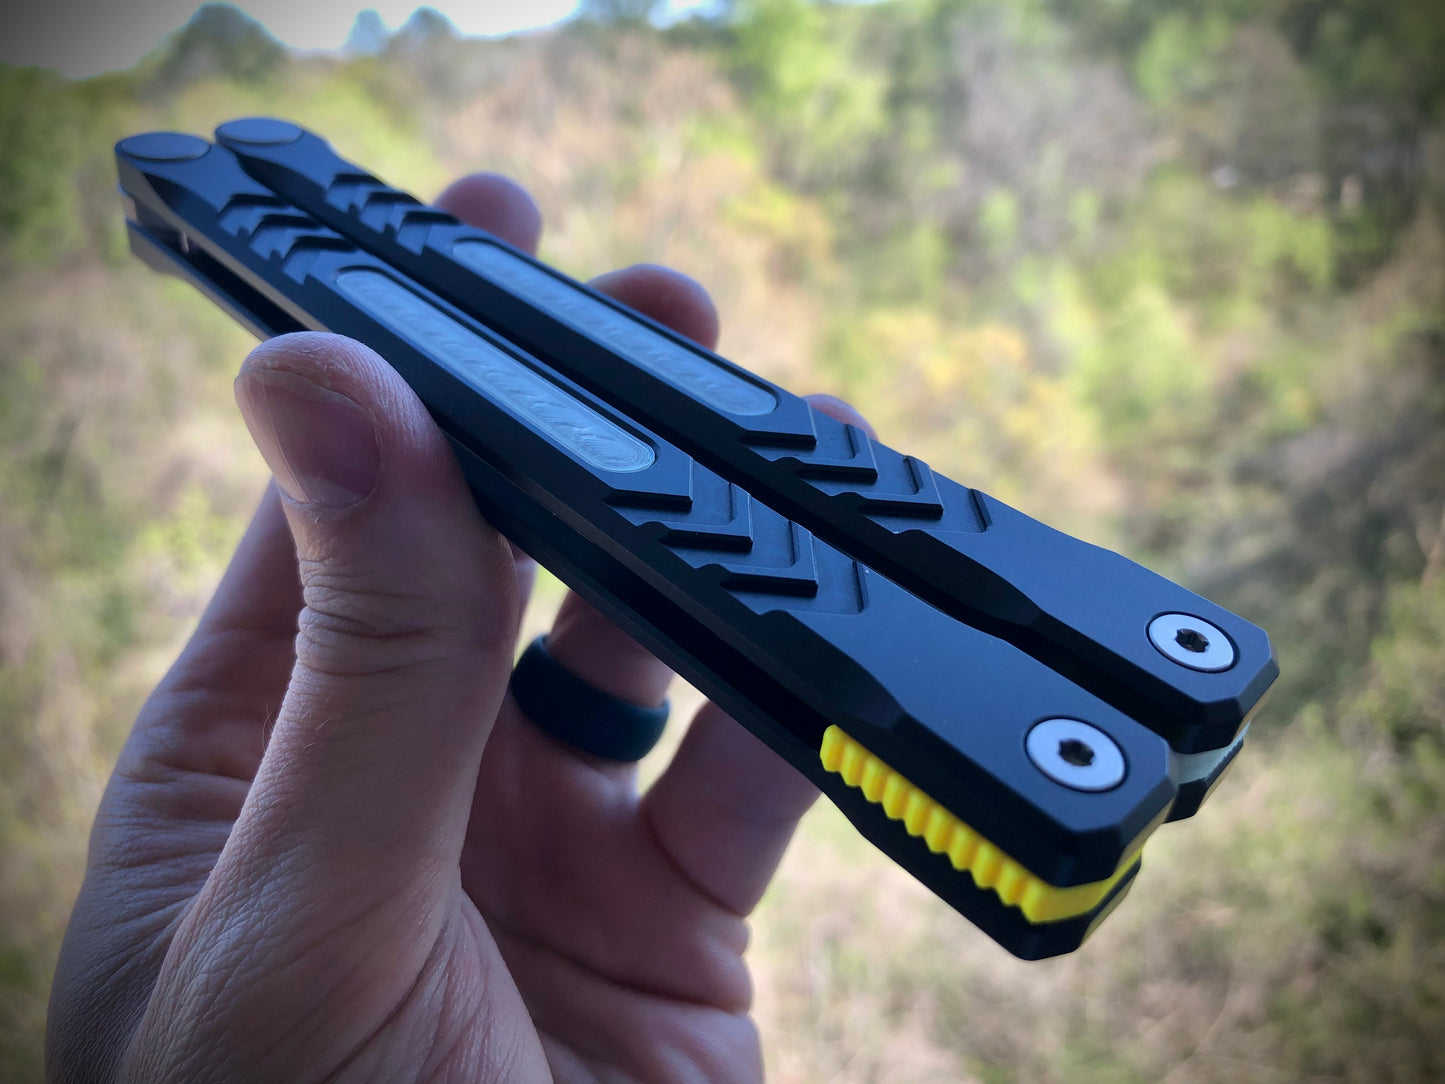 Reduce the handle bias and add grip to your Revo Nexus balisong with Zippy handle inlays and lightweight spacers featuring positive jimping. revo nexus, revo nexus balisong, revo nexus for sale, revo nexus mods, revo knife, nexus knife, revo nexus knife, revo butterfly knife, revo balisong knife, nexus balisong knife, nexus balisong, revo balisong